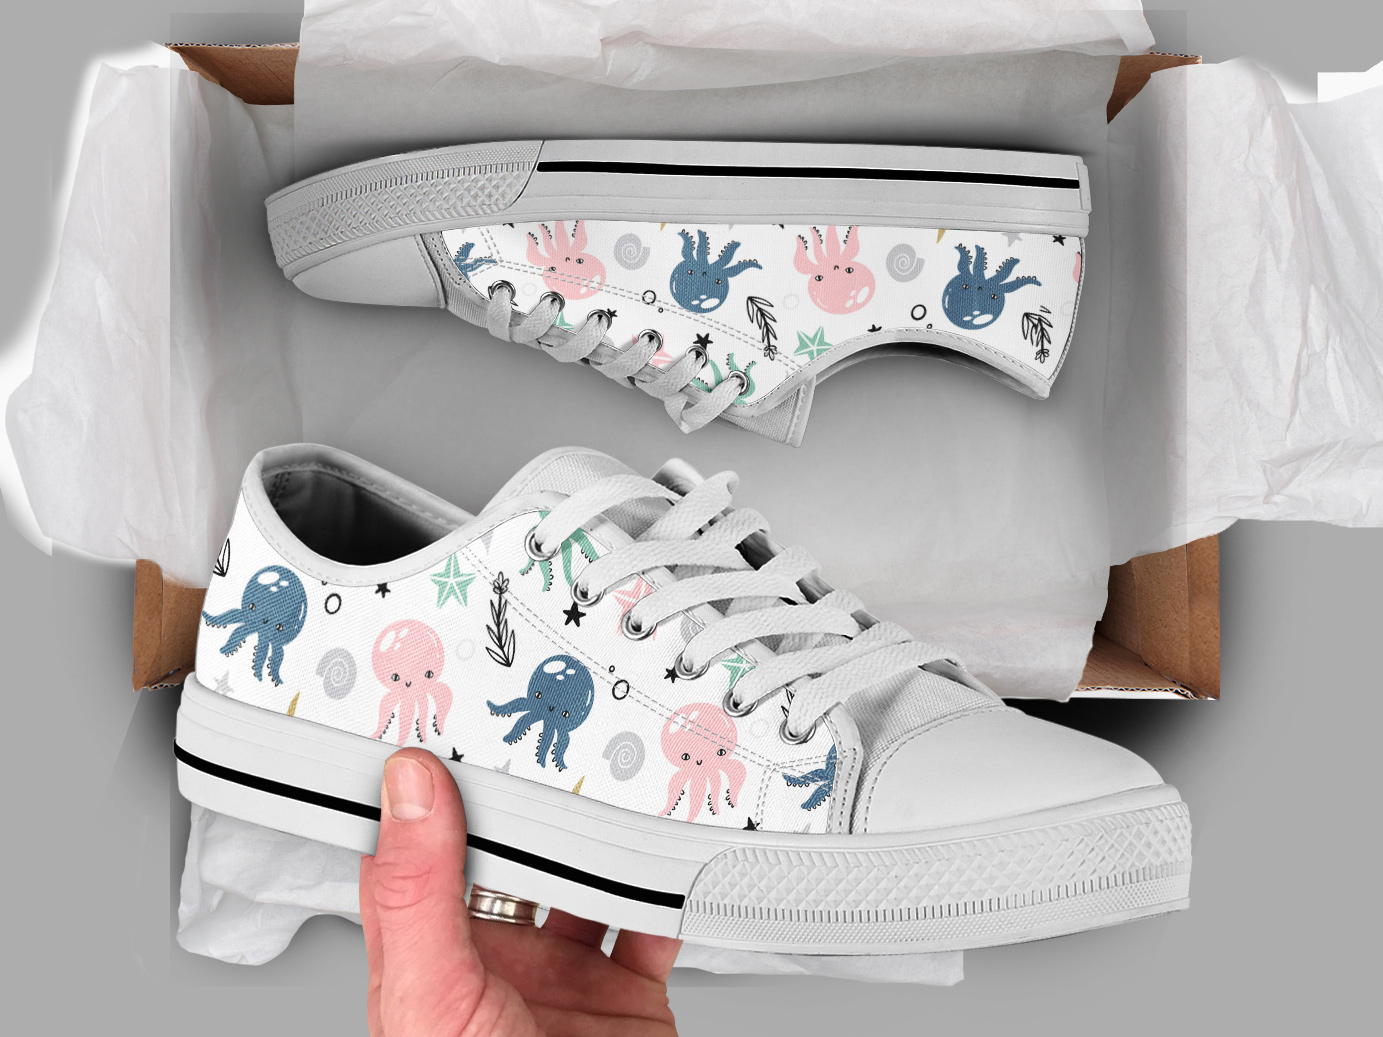 Cute Octopus Shoes | Custom Low Tops Sneakers For Kids & Adults